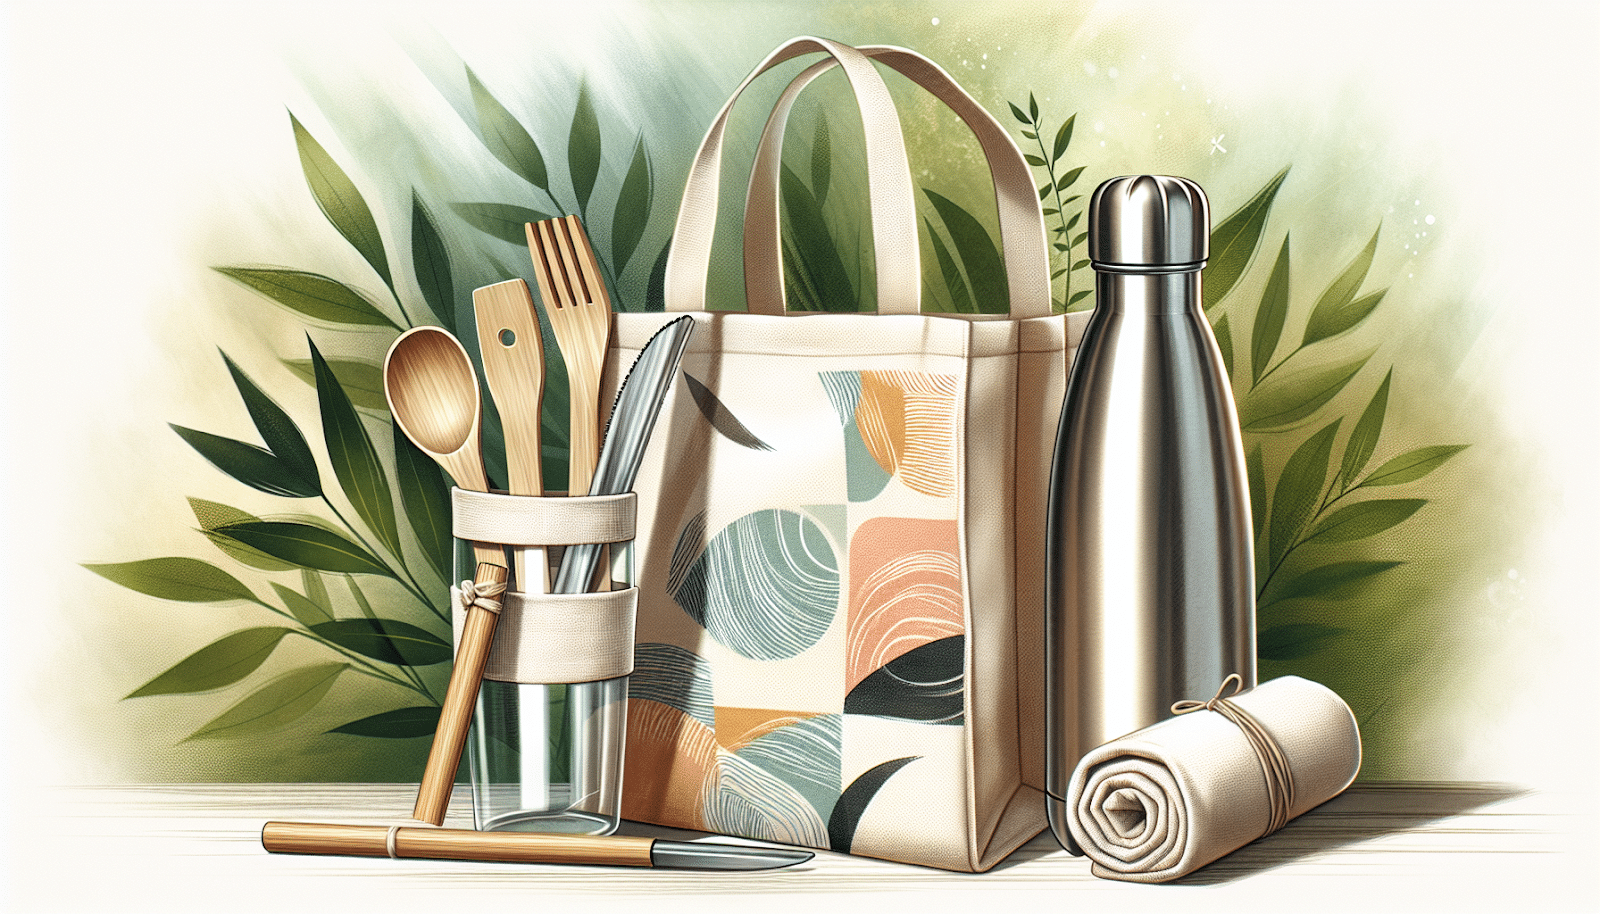 Illustration of various reusable products